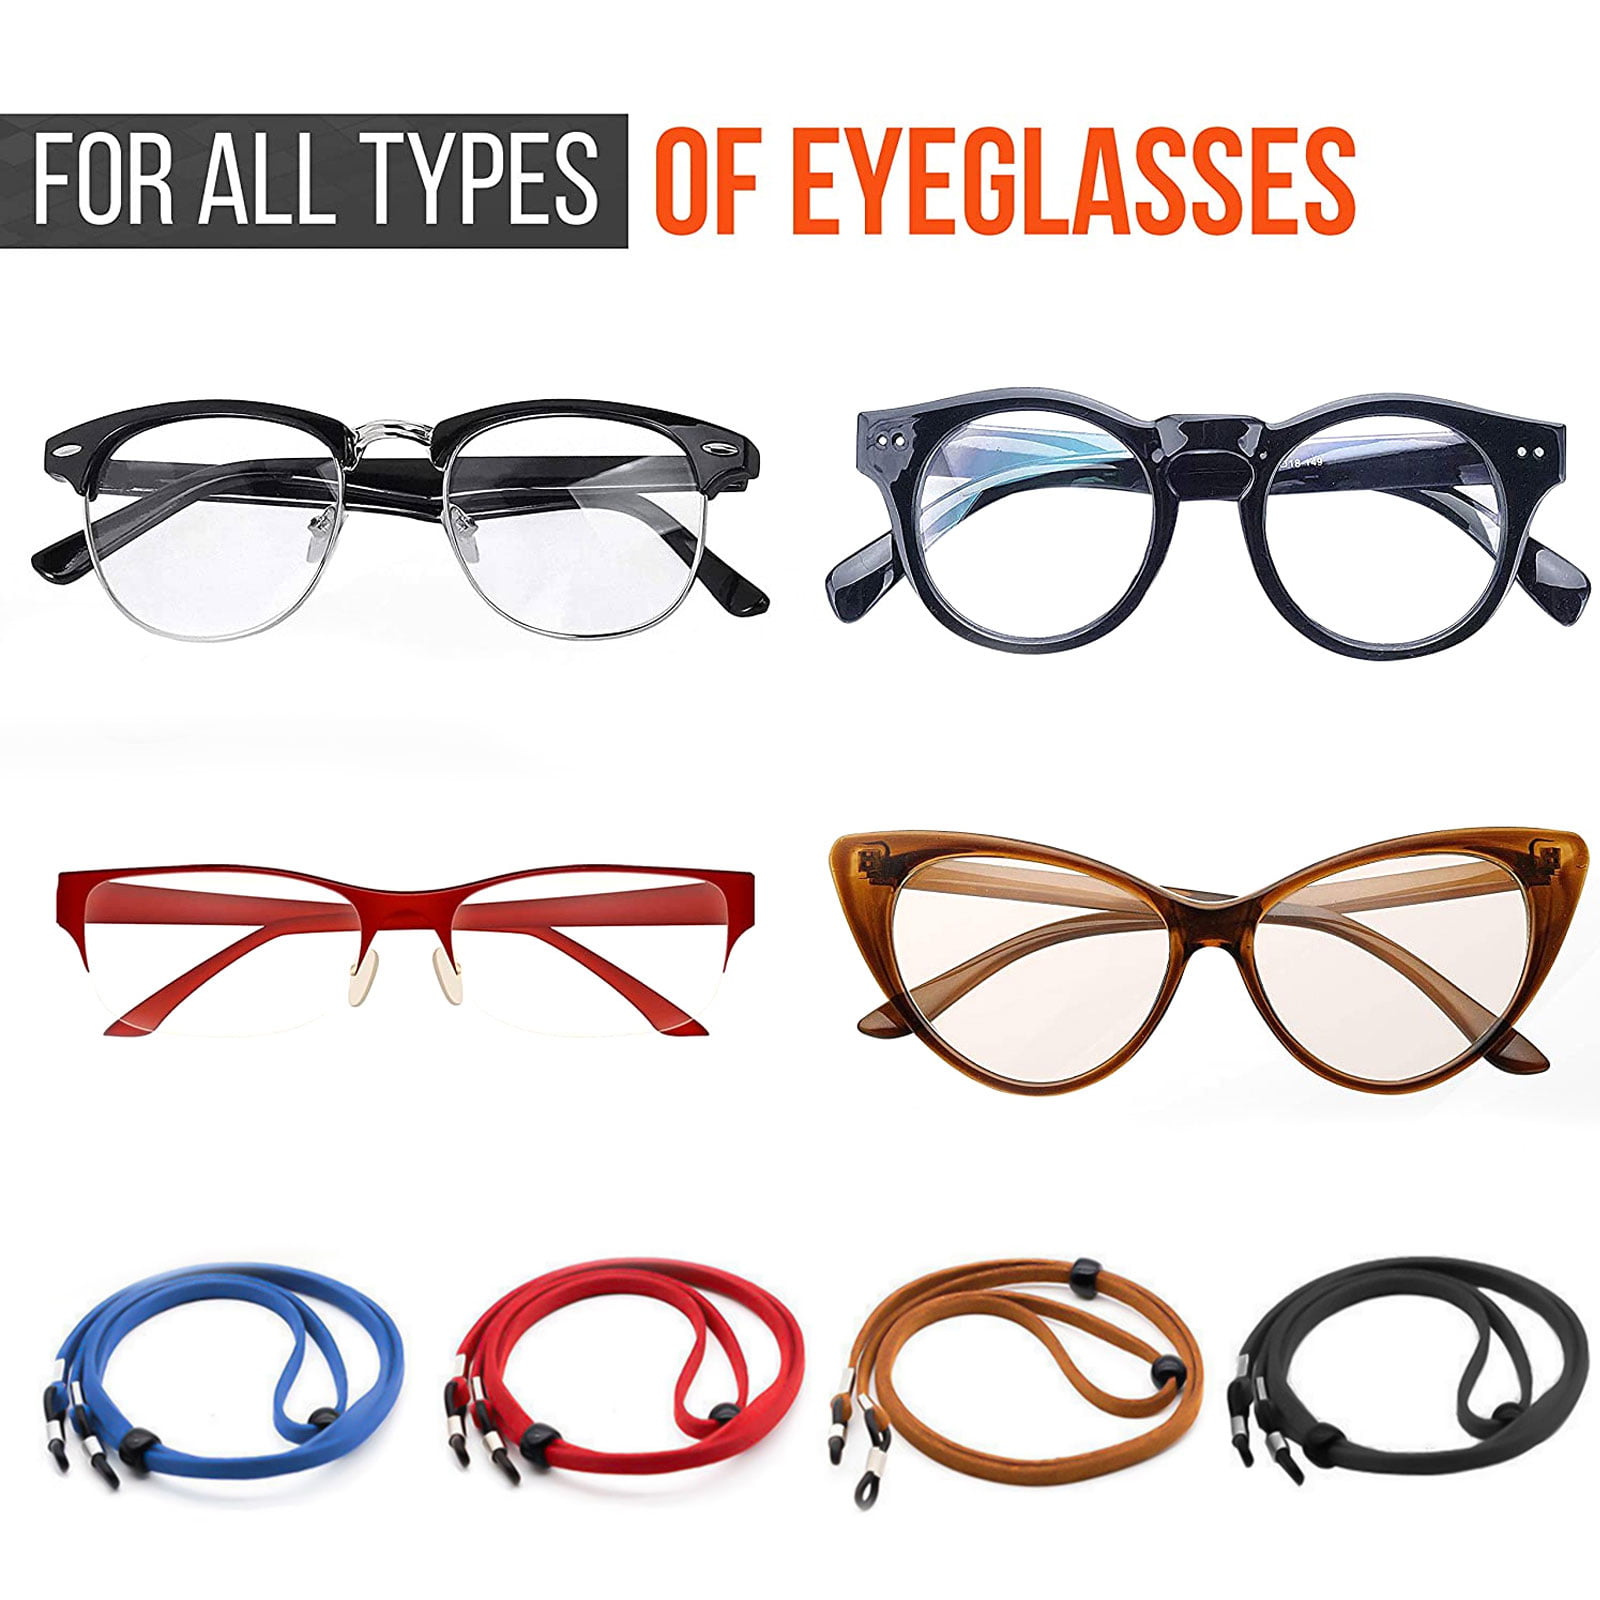 Eyeglass Chains PU Leather Adjustable Eyeglasses Retainer Strap Sunglasses Holder Spectacles Neck Cord String Lanyard